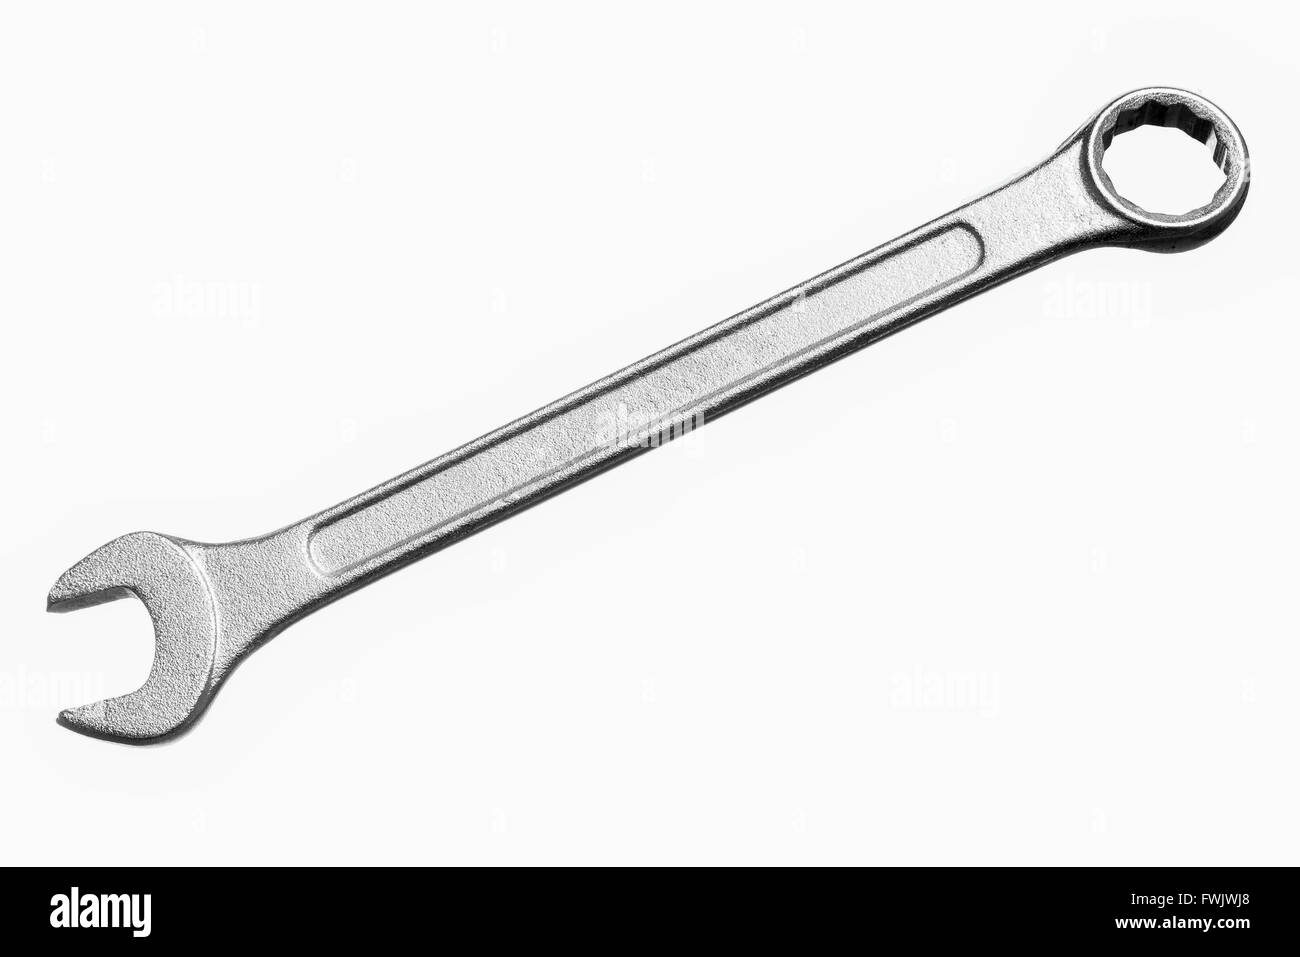 Plier Black and White Stock Photos & Images - Alamy